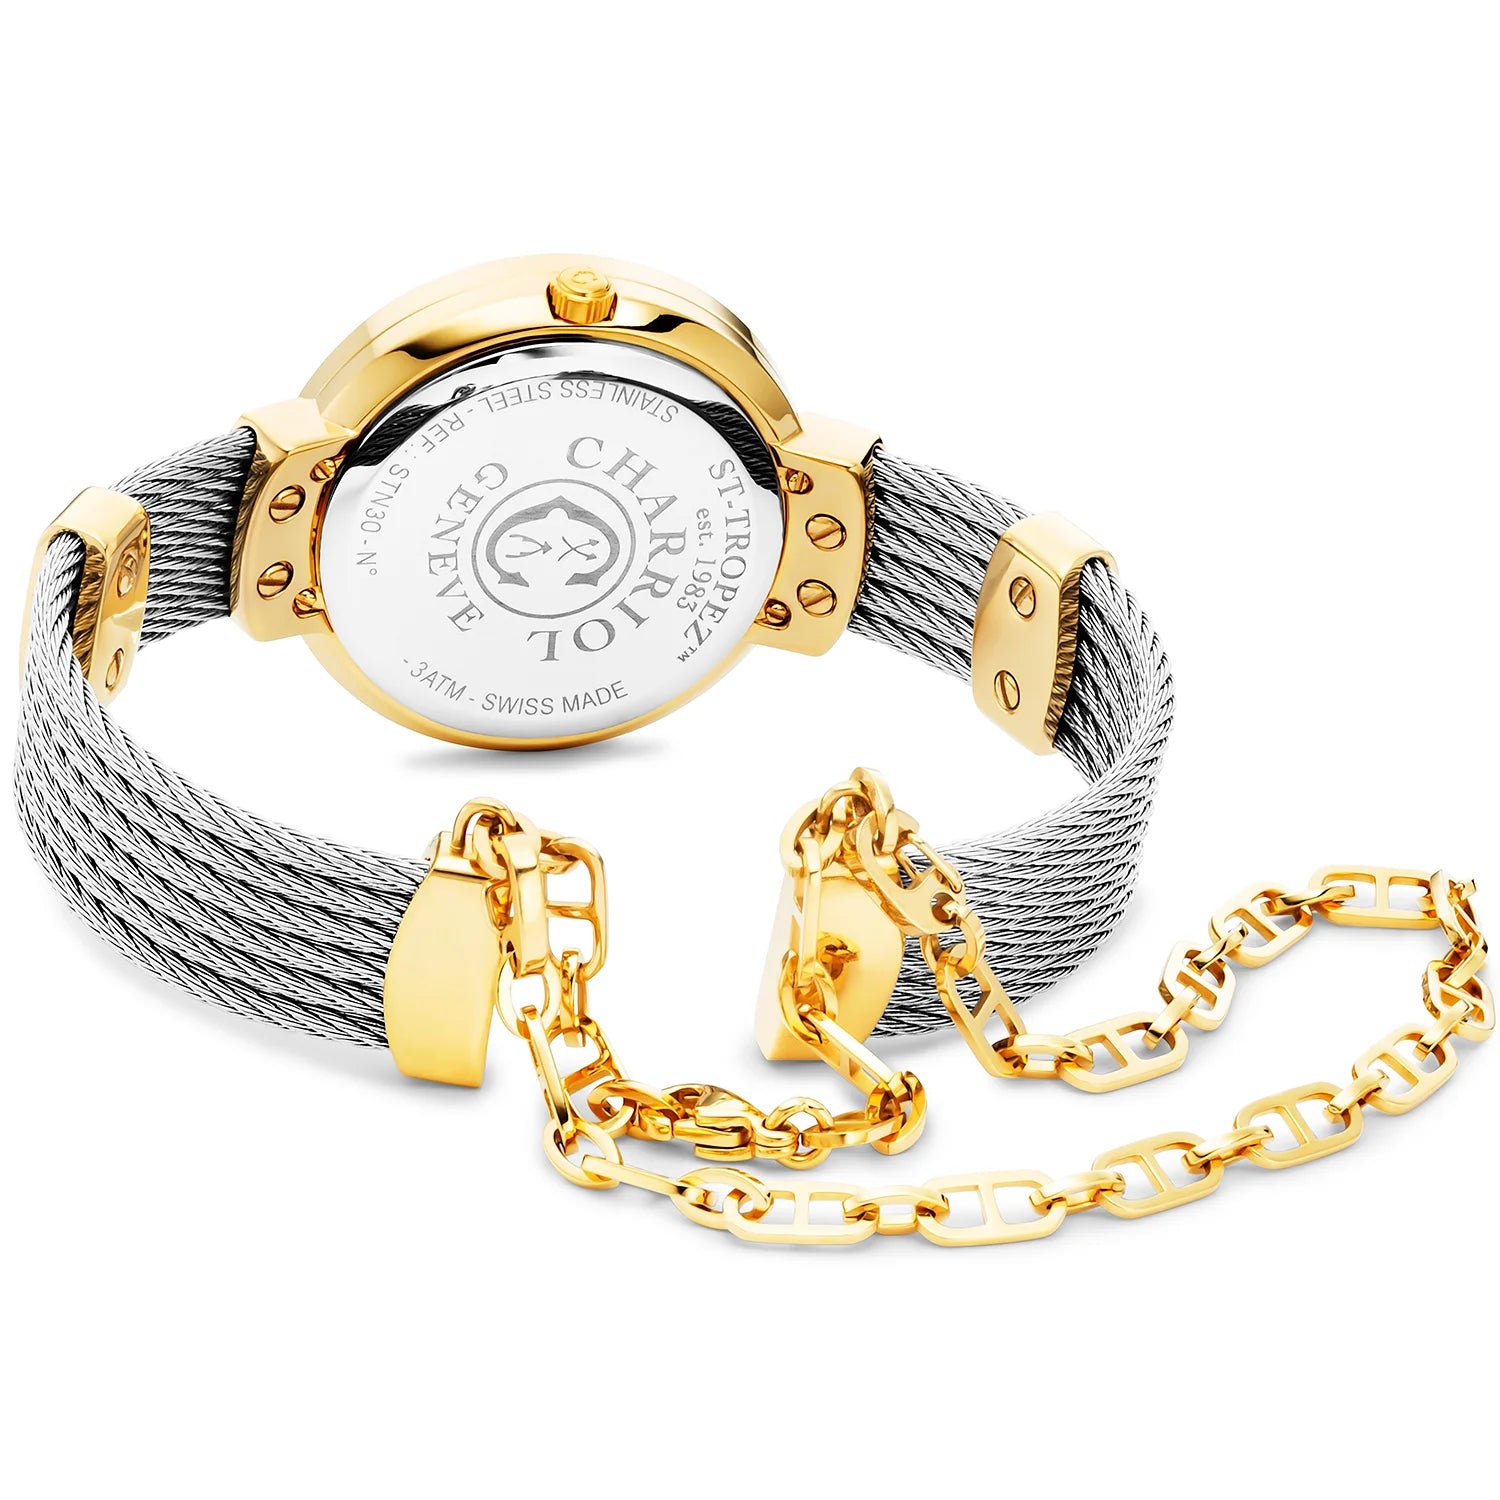 ST TROPEZ, 30MM, QUARTZ CALIBRE, MOTHER-OF-PEARL DIAL, YELLOW GOLD PVD WITH 30 DIAMONDS BEZEL, STEEL CABLE BRACELET - Charriol Geneve -  Watch